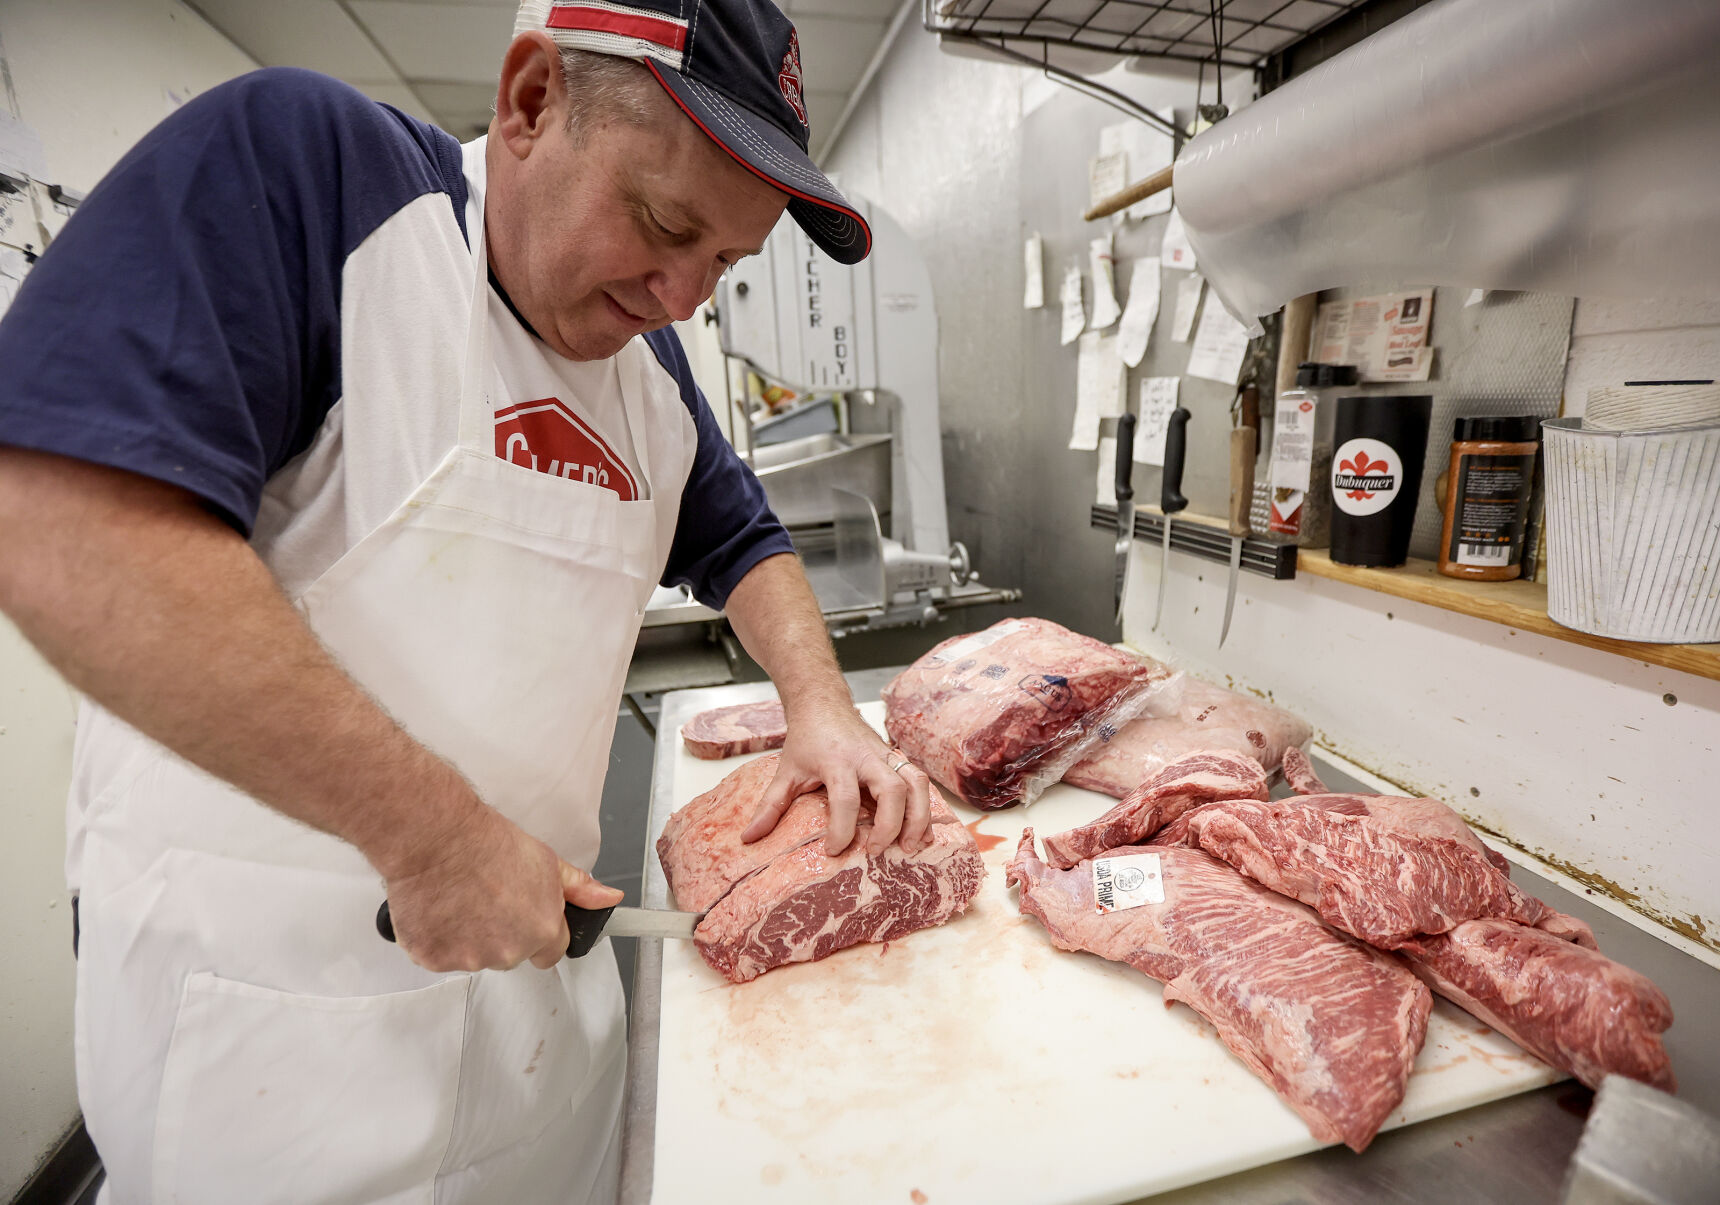 Jeff Cremer, of Cremer’s Grocery, slices steaks at his family-owned business. Cremer said when looking for a good-quality steak, “fat is flavor, and flavor is fat.”    PHOTO CREDIT: Dave Kettering/Telegraph Herald